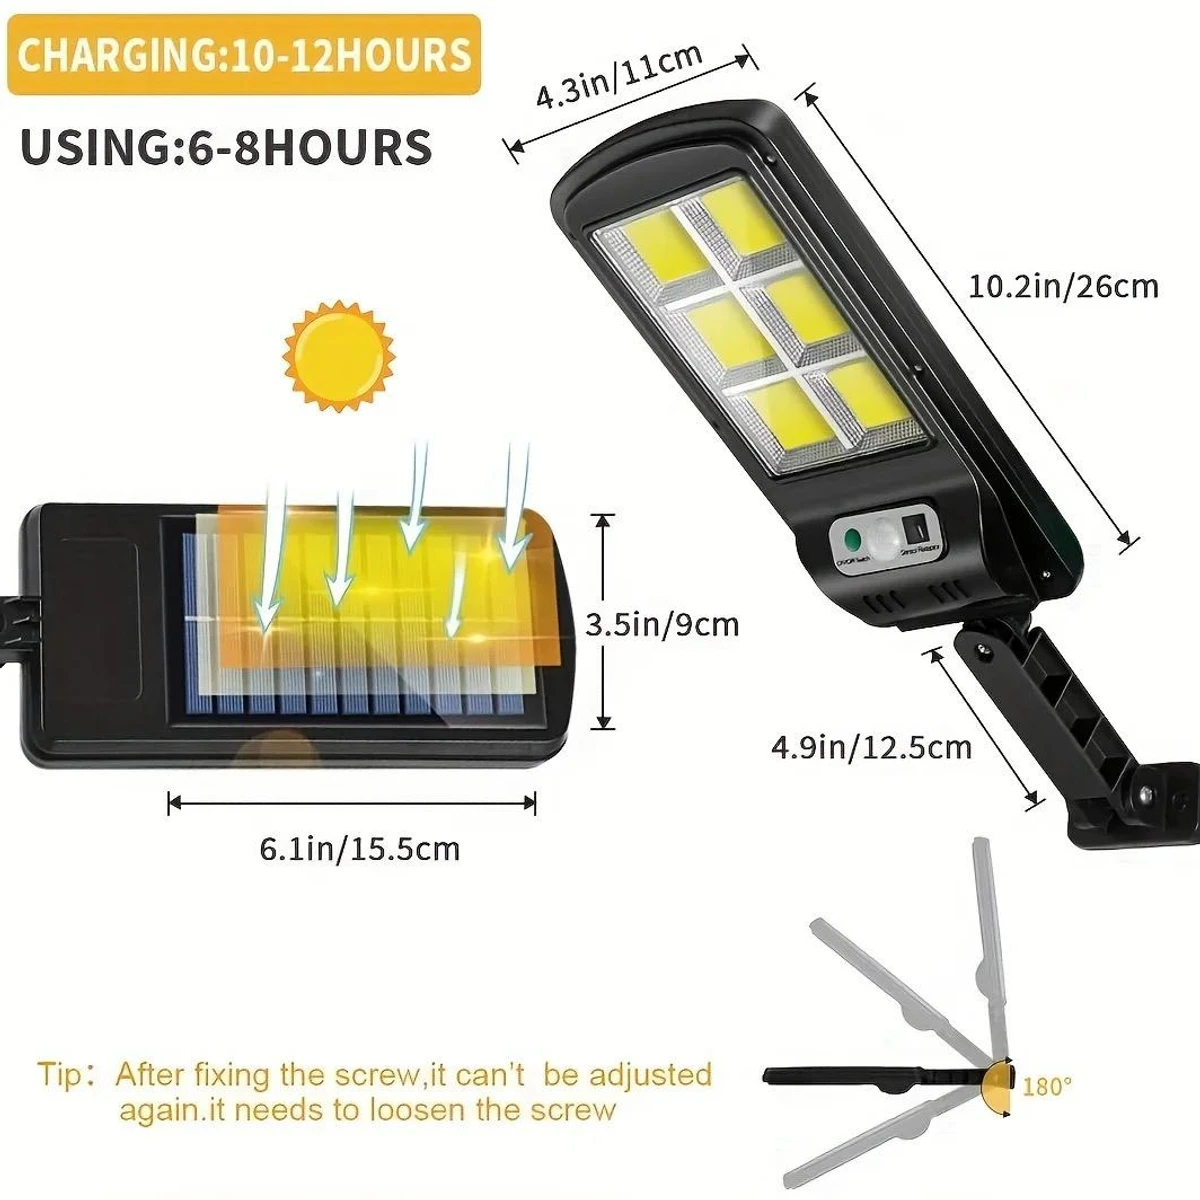 Solar Induction Street Lamp with Motion Sensor, 2-Lighting Levels, and a Remote Control in 3-Operating Modes